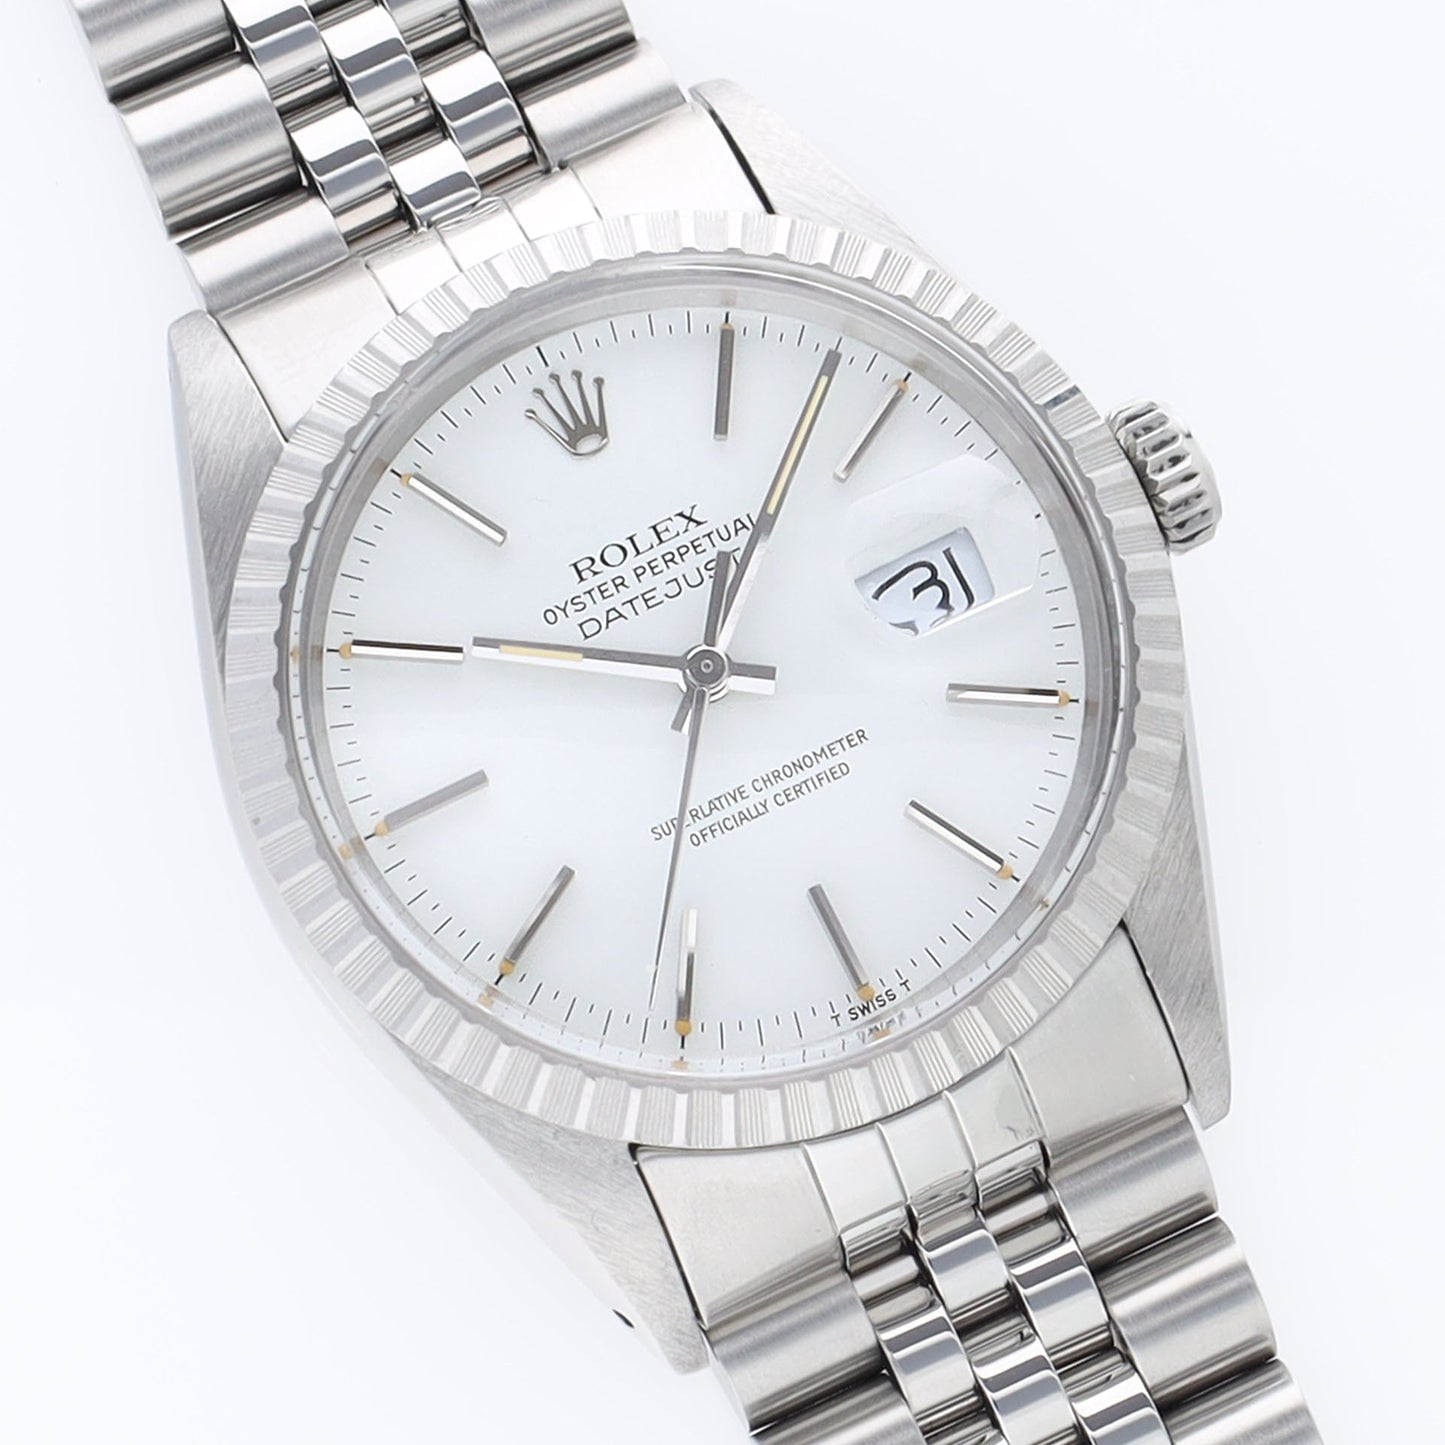 Rolex Datejust 16030 Polar White With Papers